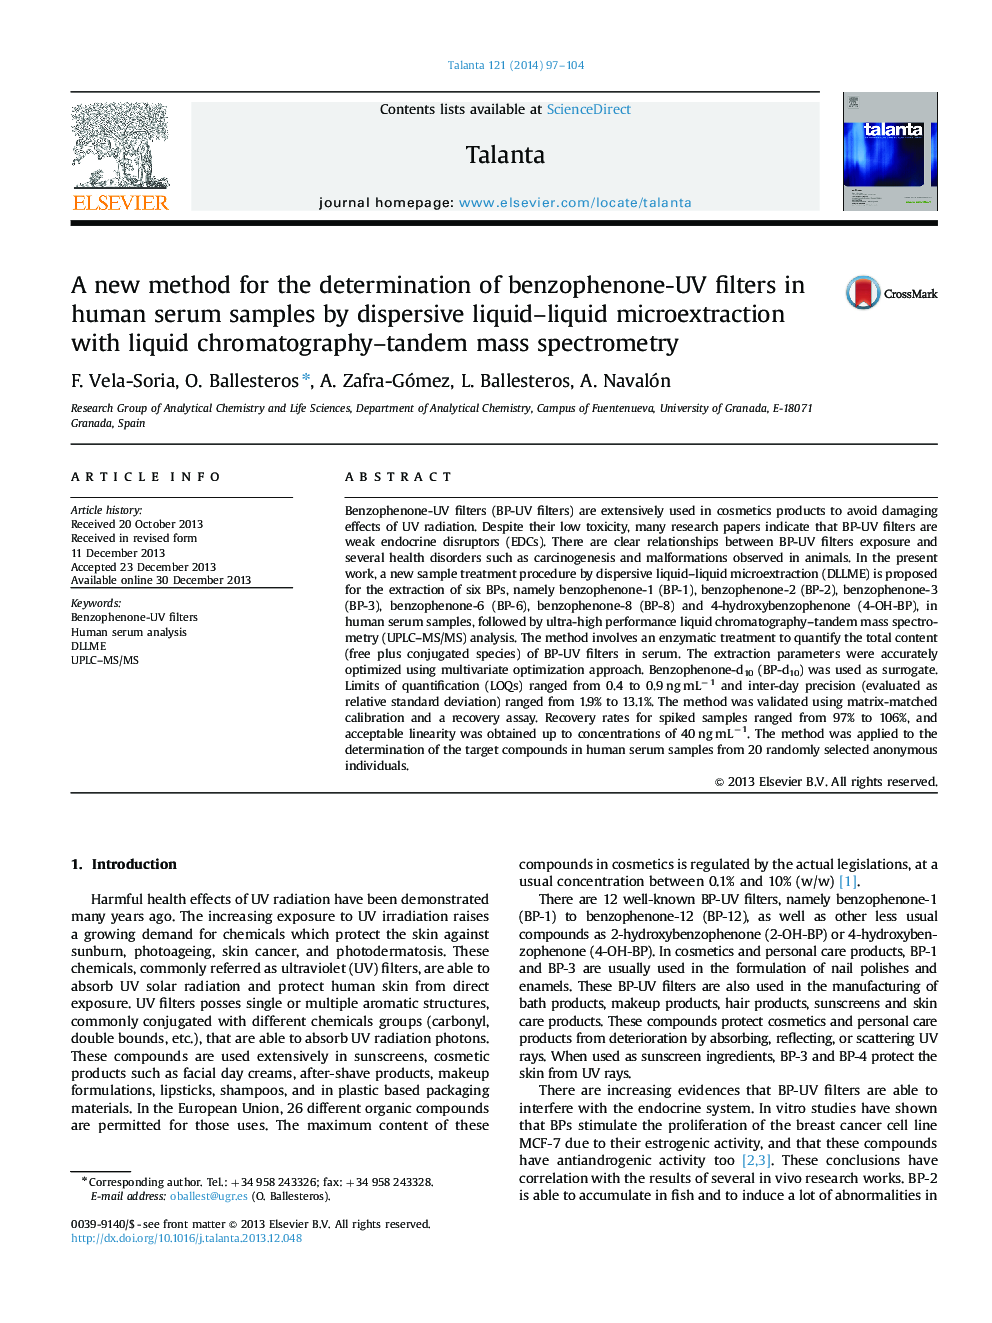 A new method for the determination of benzophenone-UV filters in human serum samples by dispersive liquid-liquid microextraction with liquid chromatography-tandem mass spectrometry